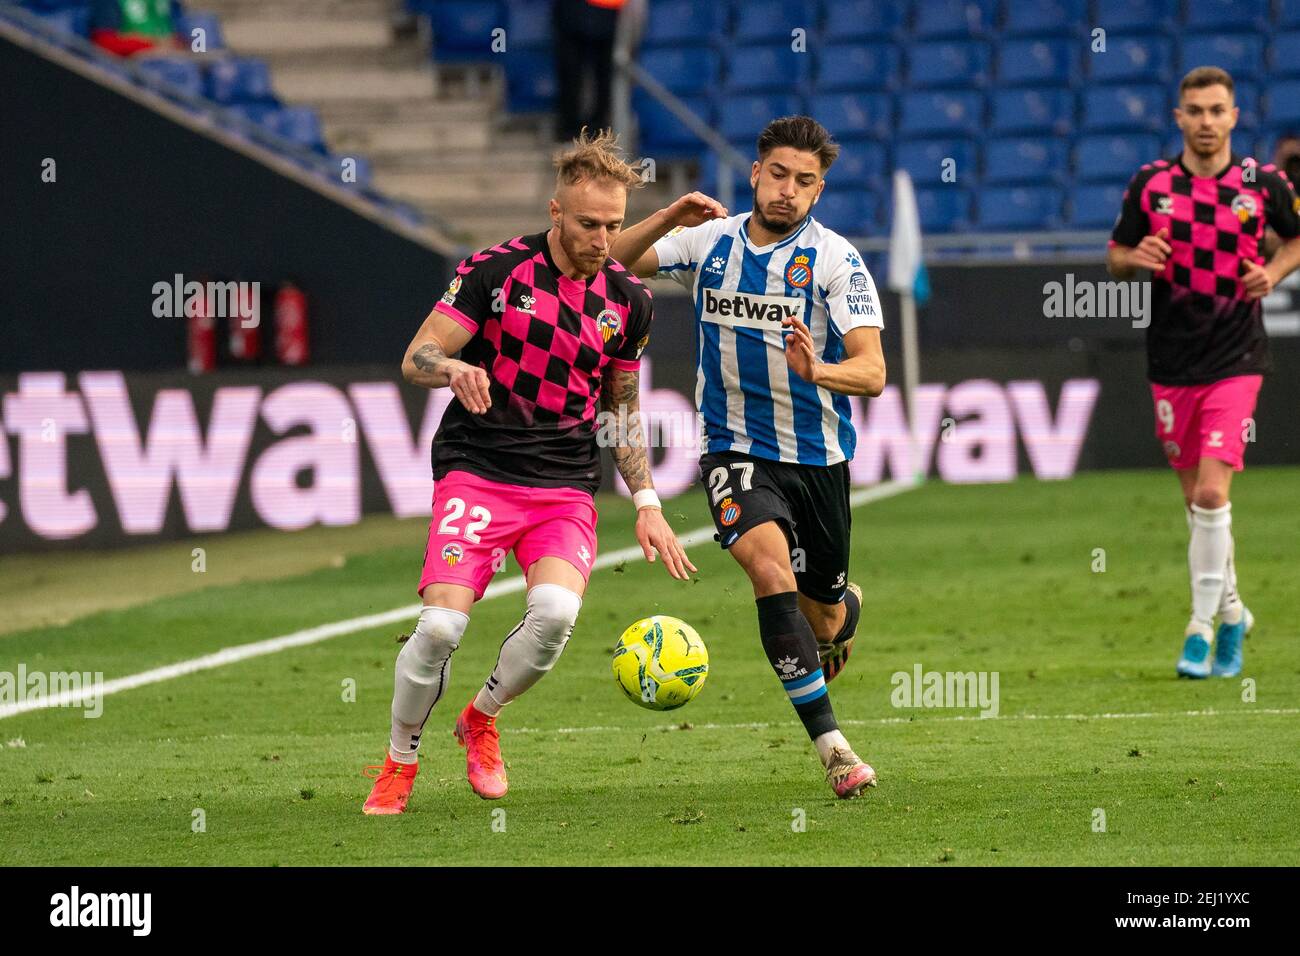 Cornella, Spain. 20th Feb, 2021. Espanyol's Oscar Gil (R) vies with Sabadell's Pierre Cornud during the Spanish second division league match between RCD Espanyol and CE Sabadell in Cornella, Spain, on Feb. 20, 2021. Credit: Joan Gosa/Xinhua/Alamy Live News Stock Photo